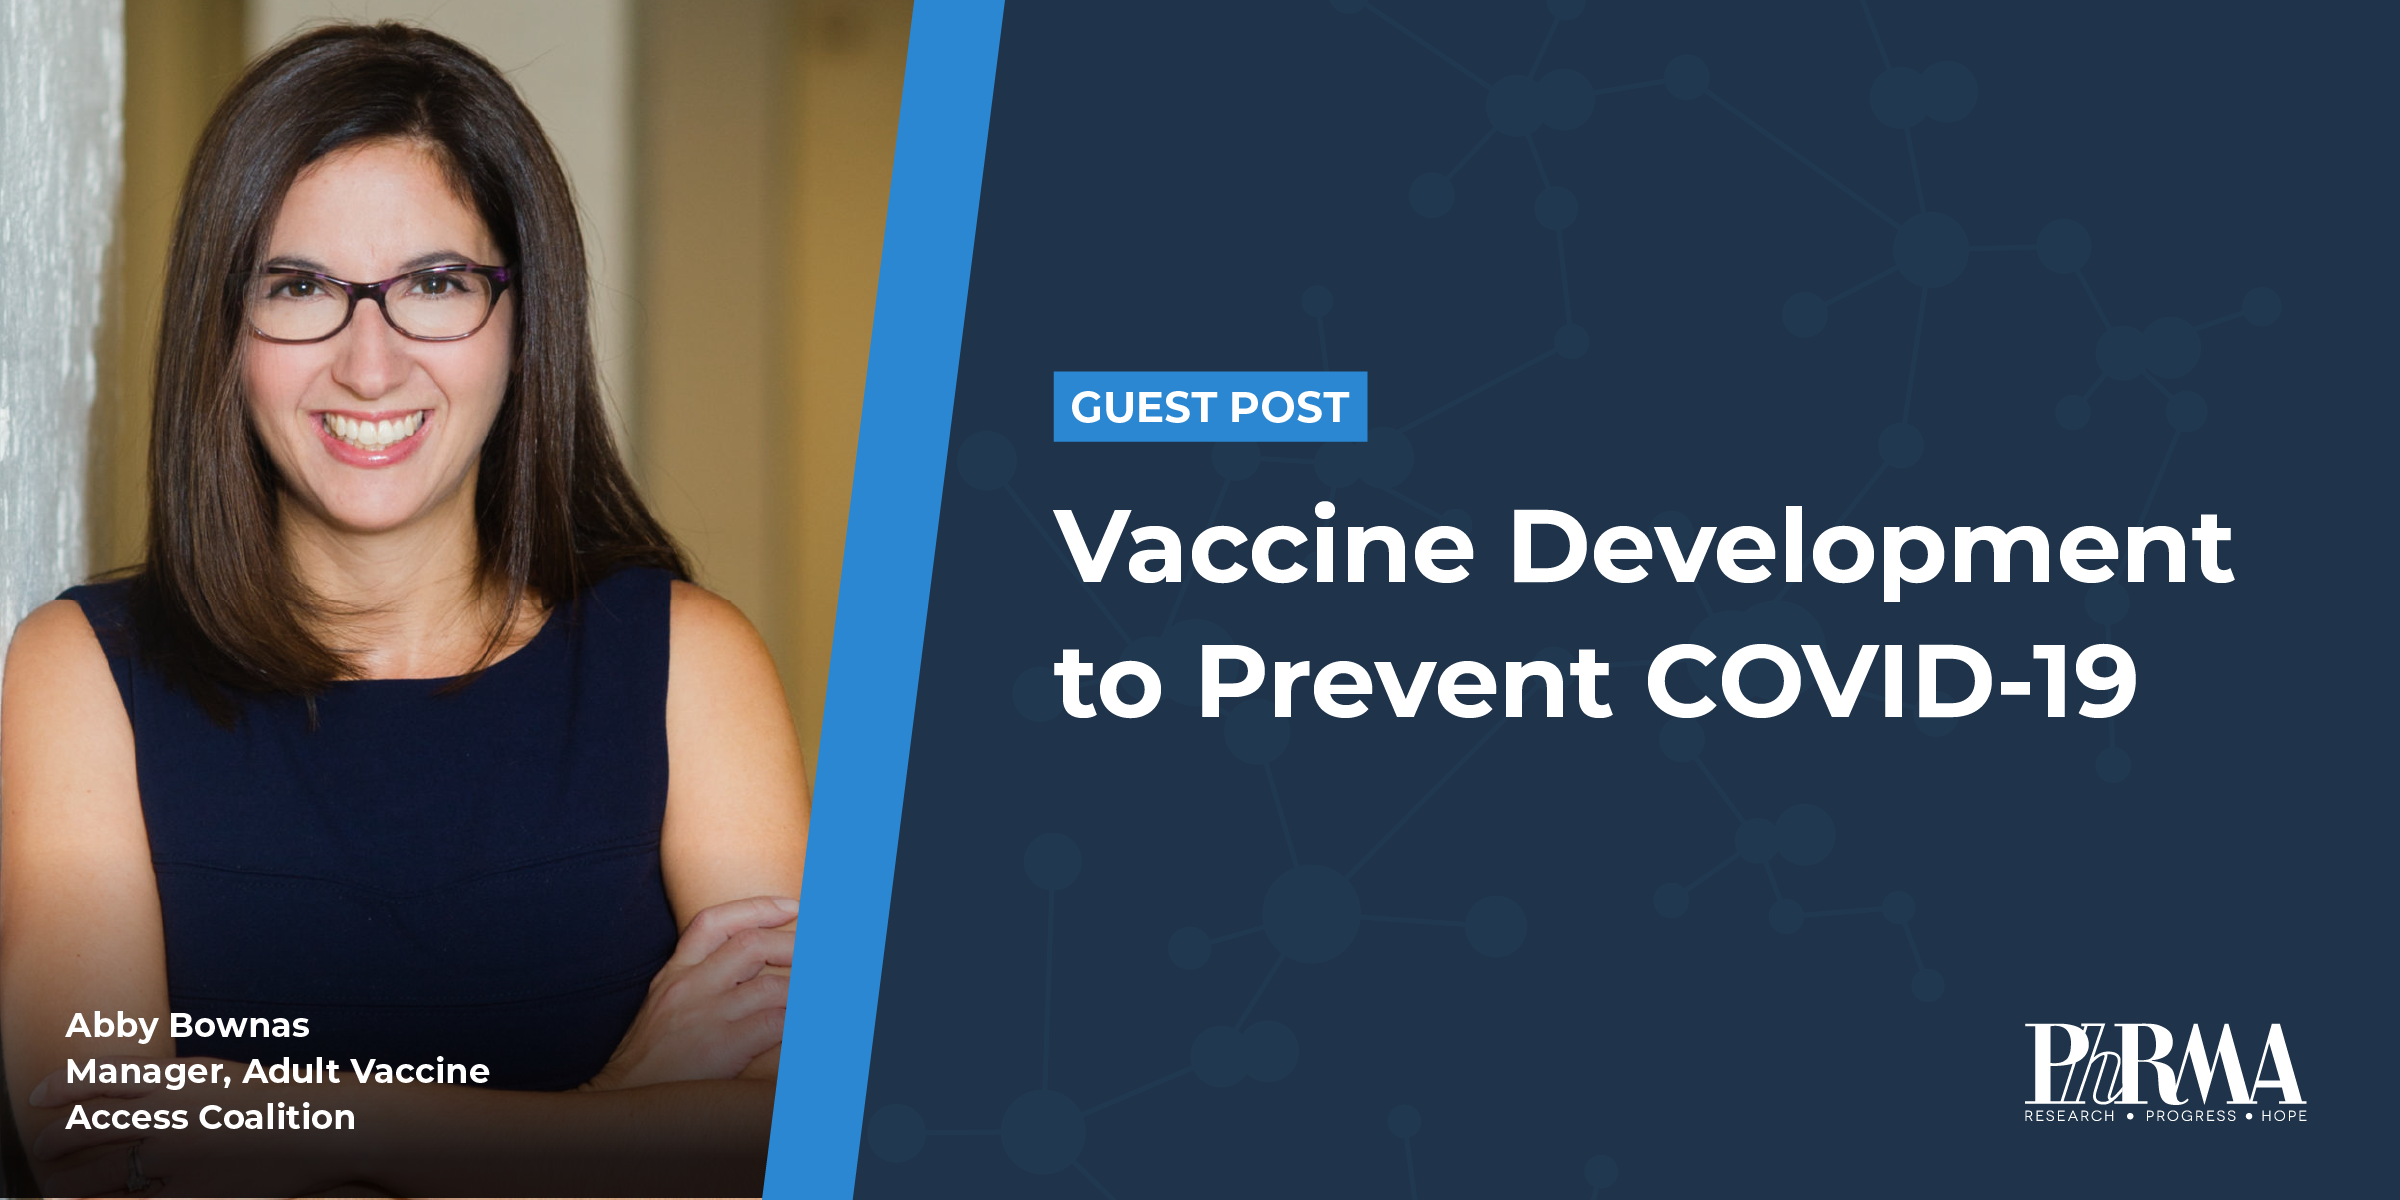 Guest Post: From lab to jab: Vaccine development to prevent COVID-19